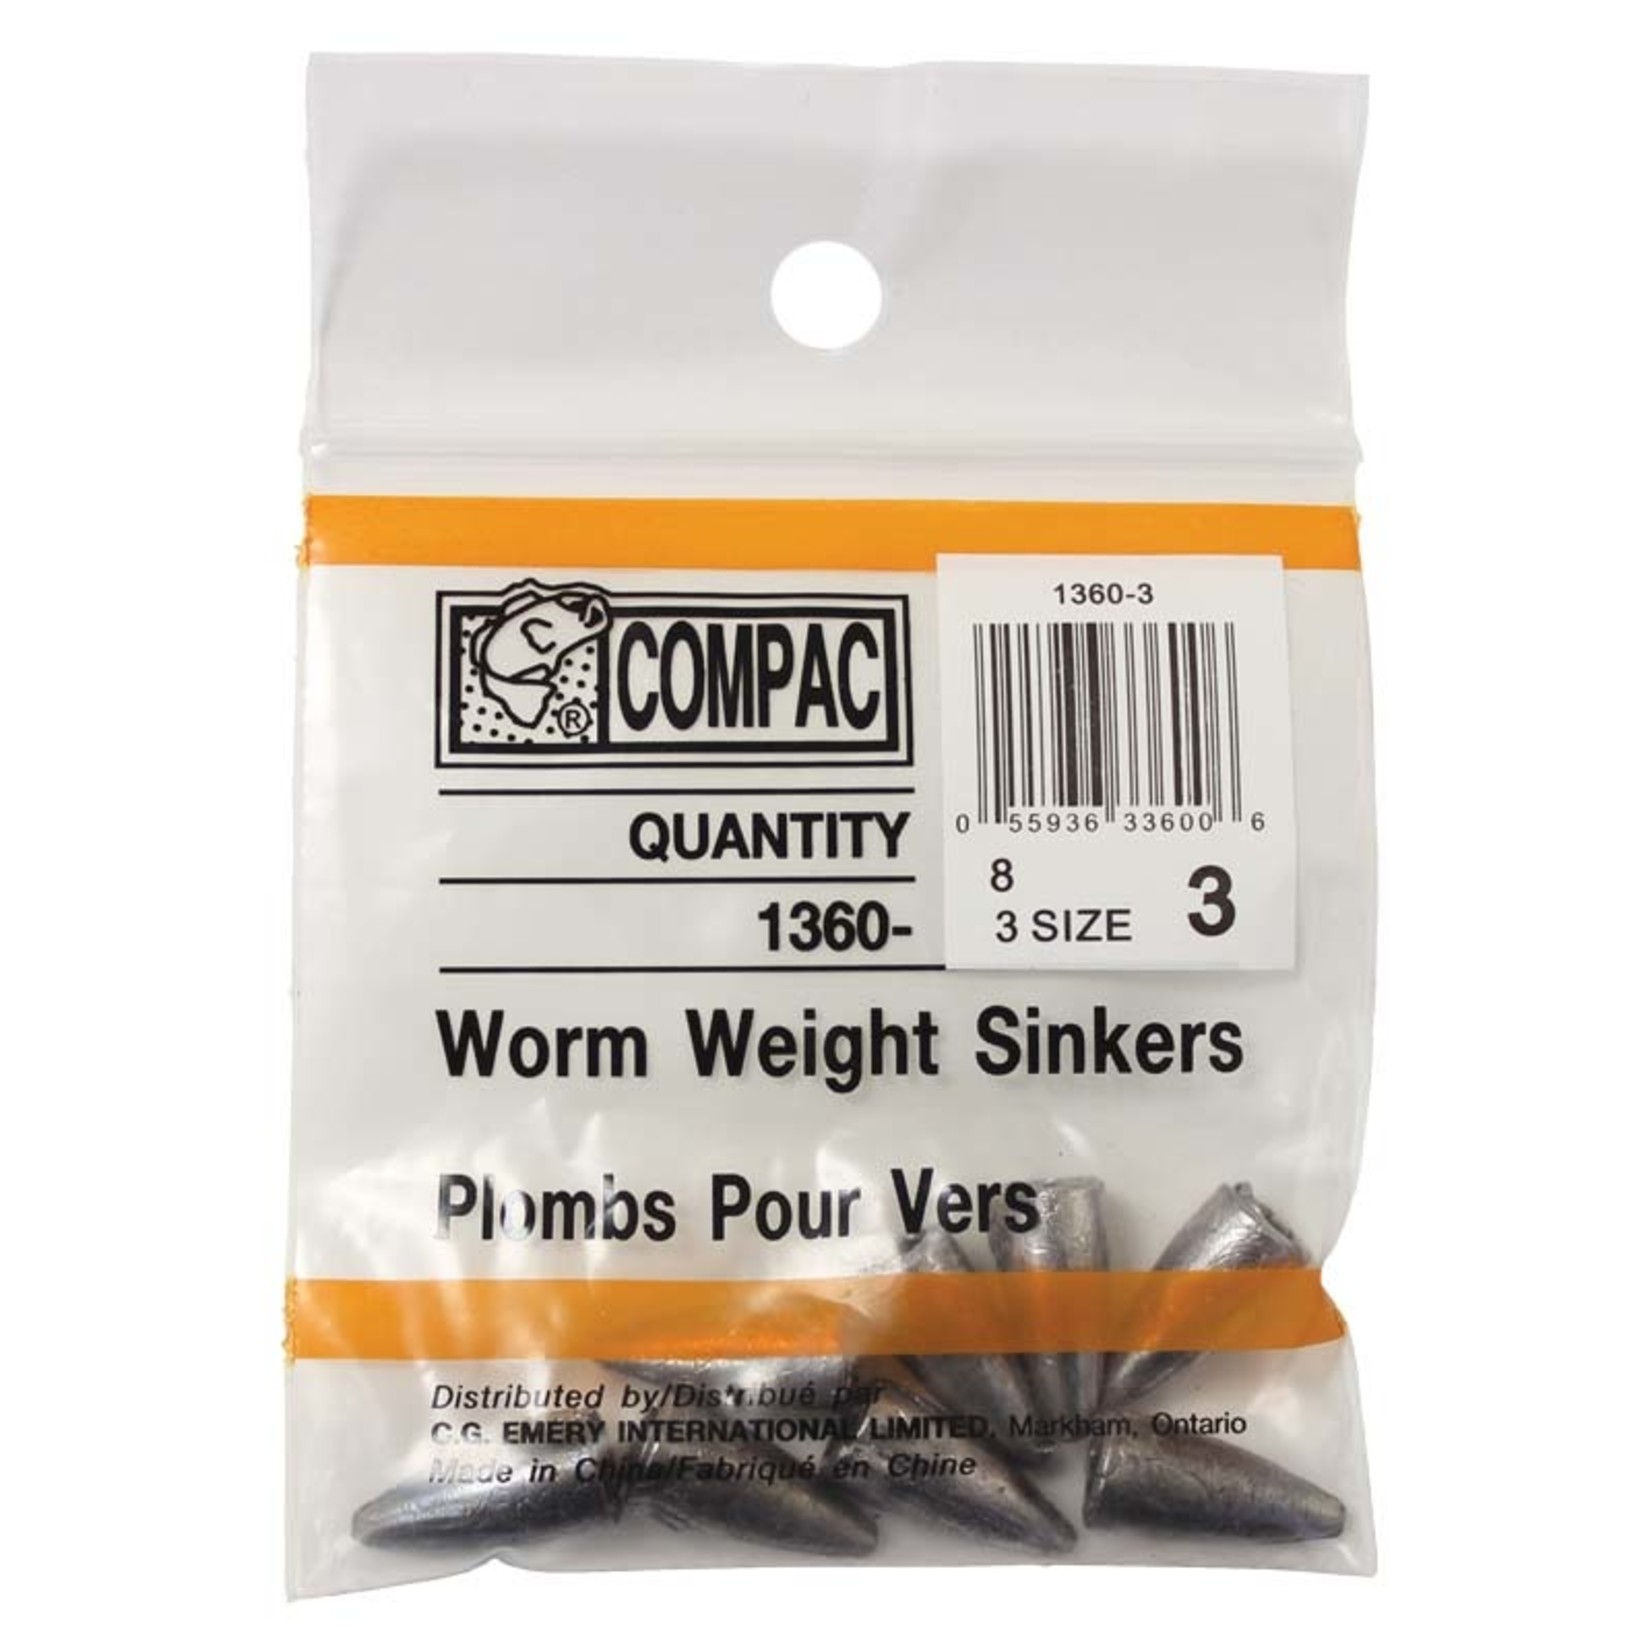 Compac Compac Worm Weight Sinkers